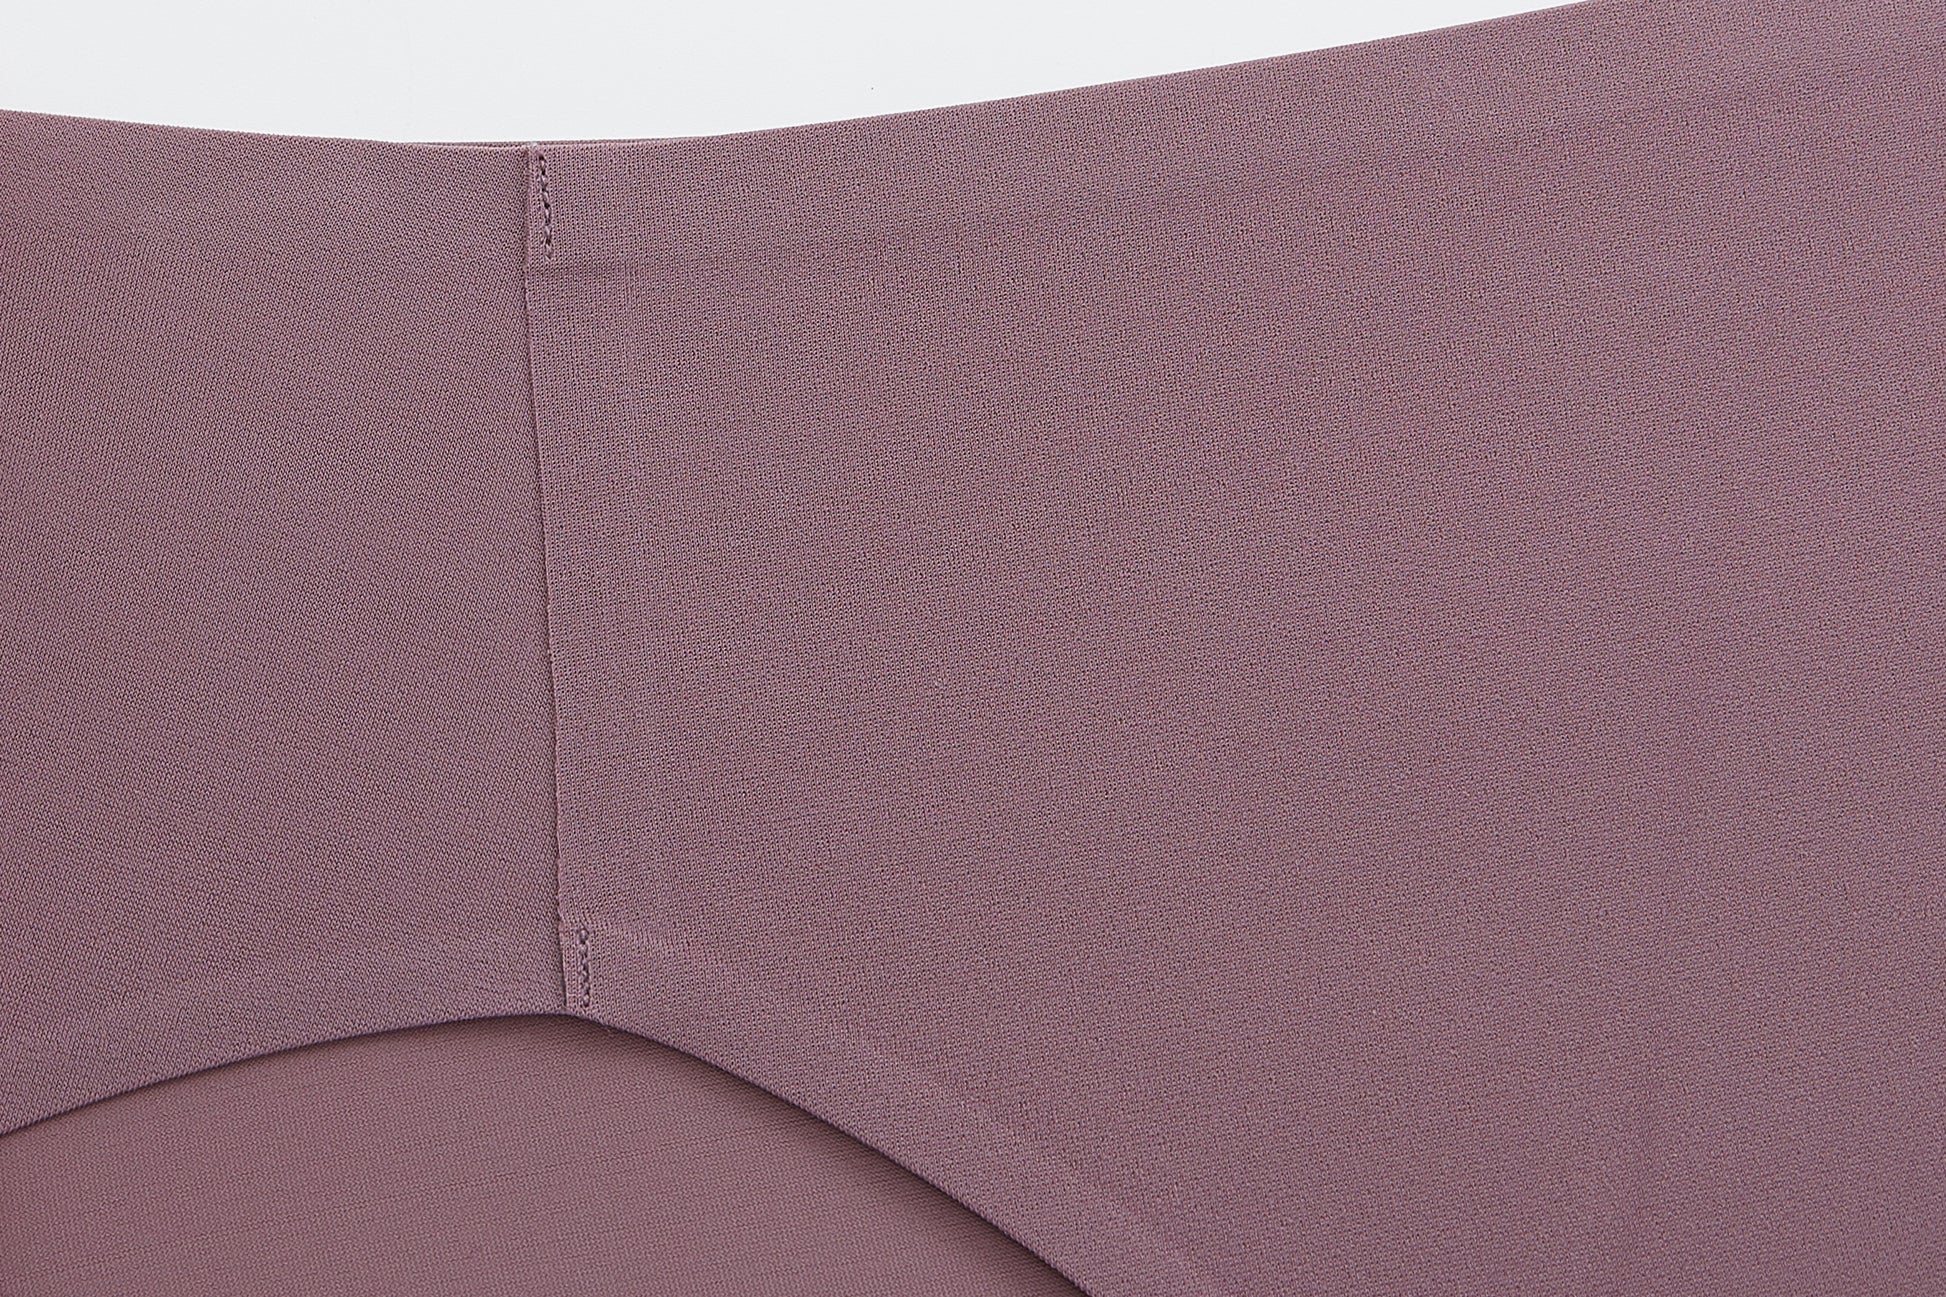 Fabric details of the Low Waist Period Brief